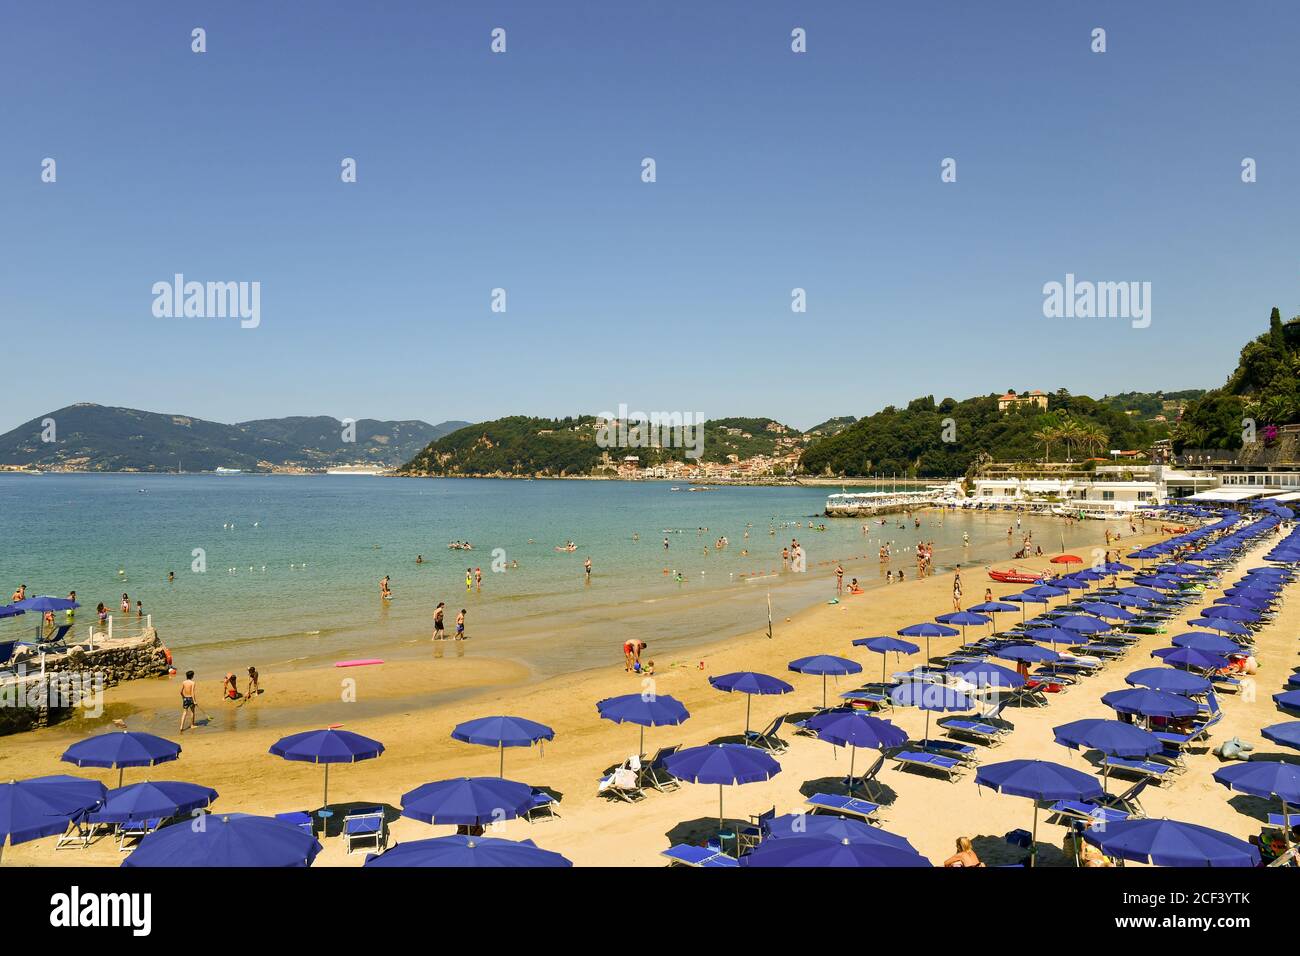 High angle view of a sandy beach with rows of sun umbrellas on the shore of the Gulf of Poets in a sunny summer day, Lerici, La Spezia, Liguria, Italy Stock Photo